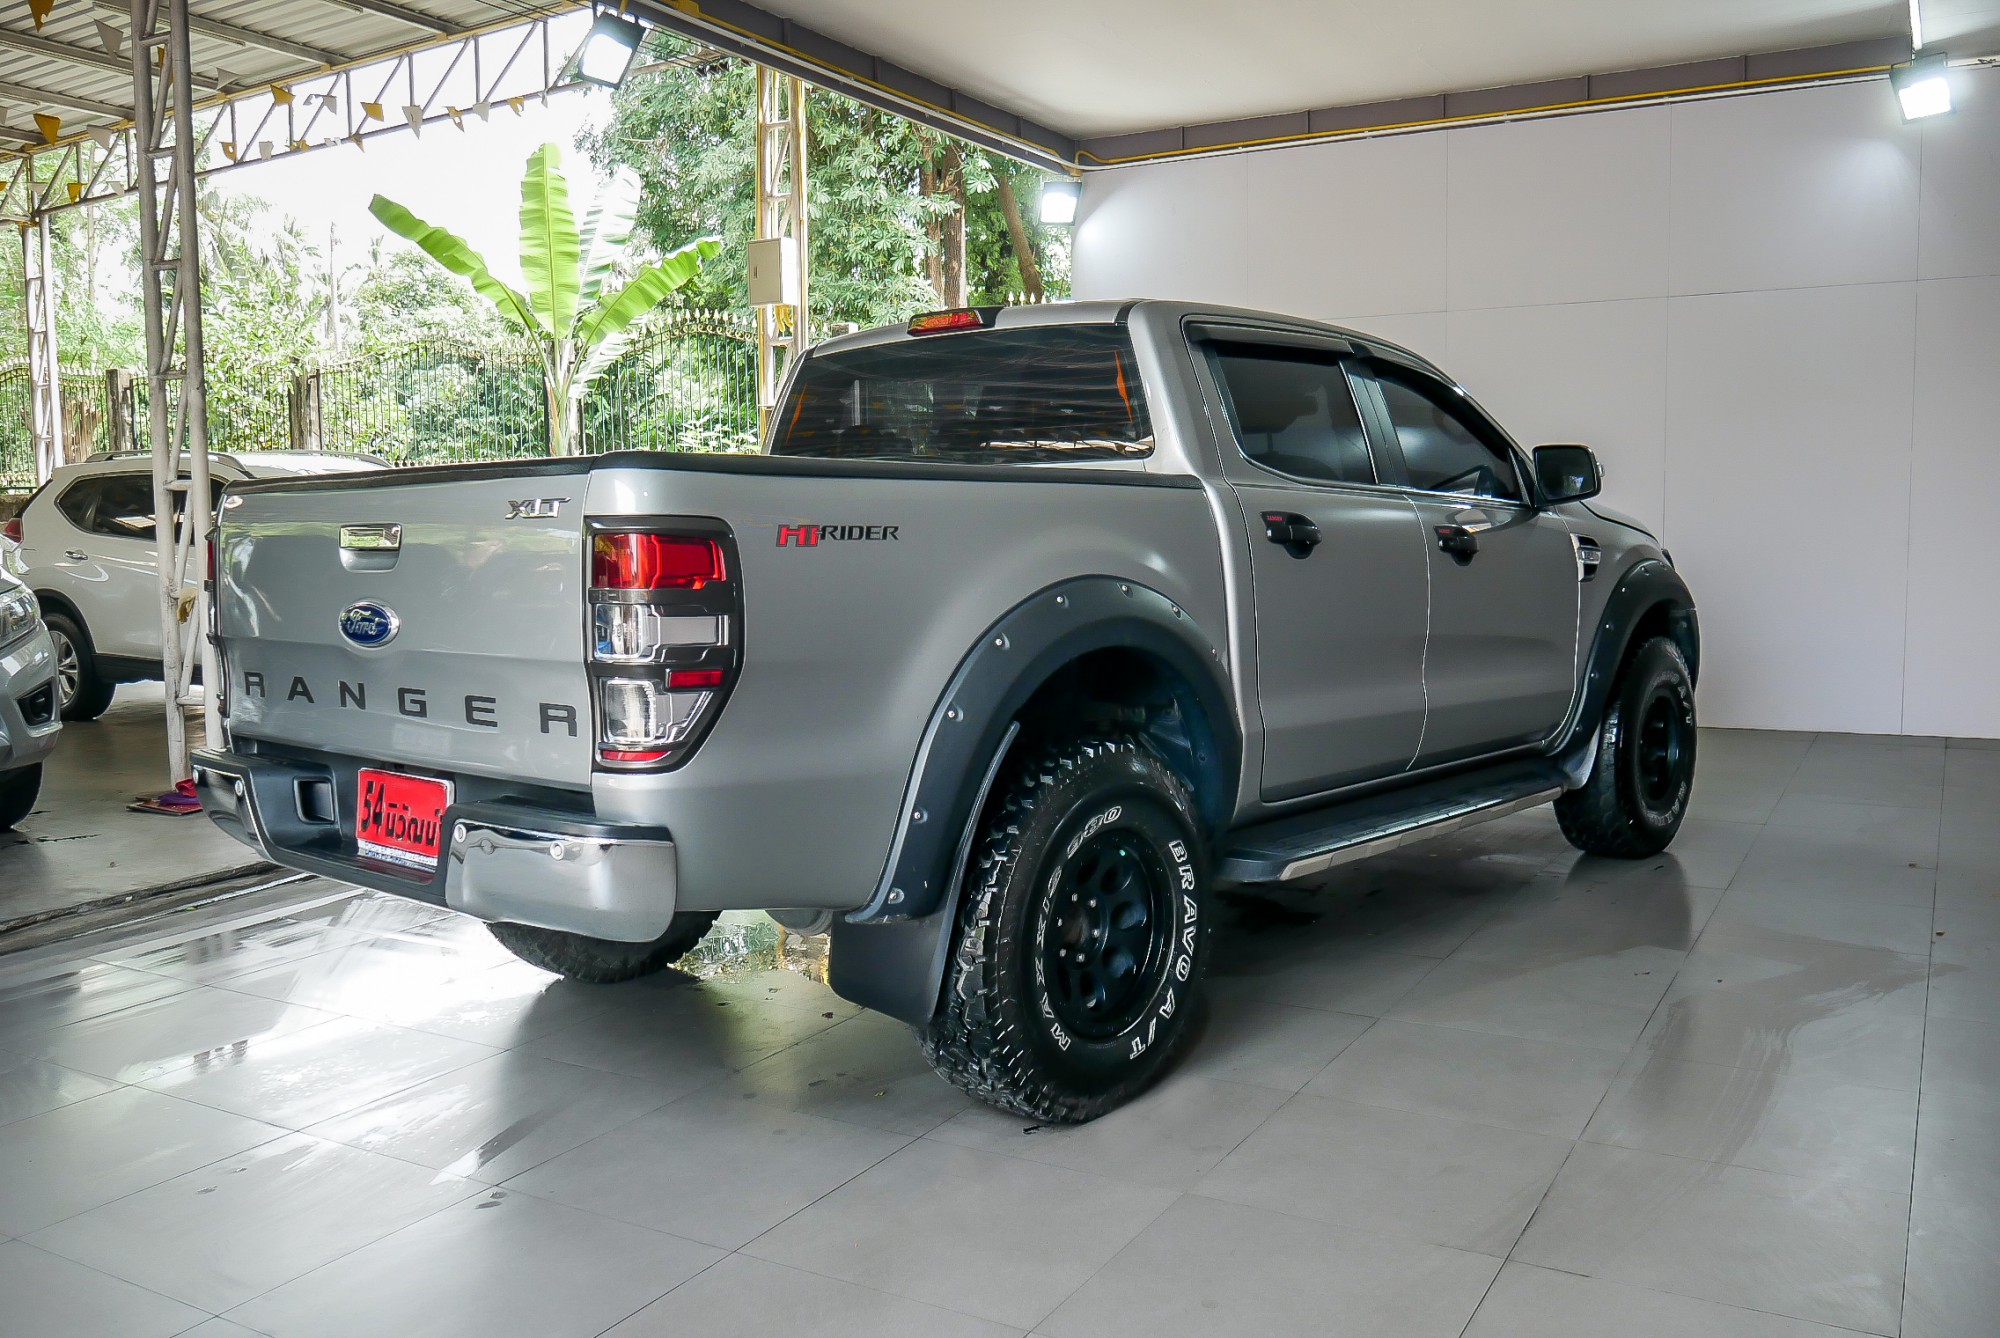 FORD RANGER DOUBLECAB 2.2 XLT HI-RIDER AT ปี 2016 สีเทา